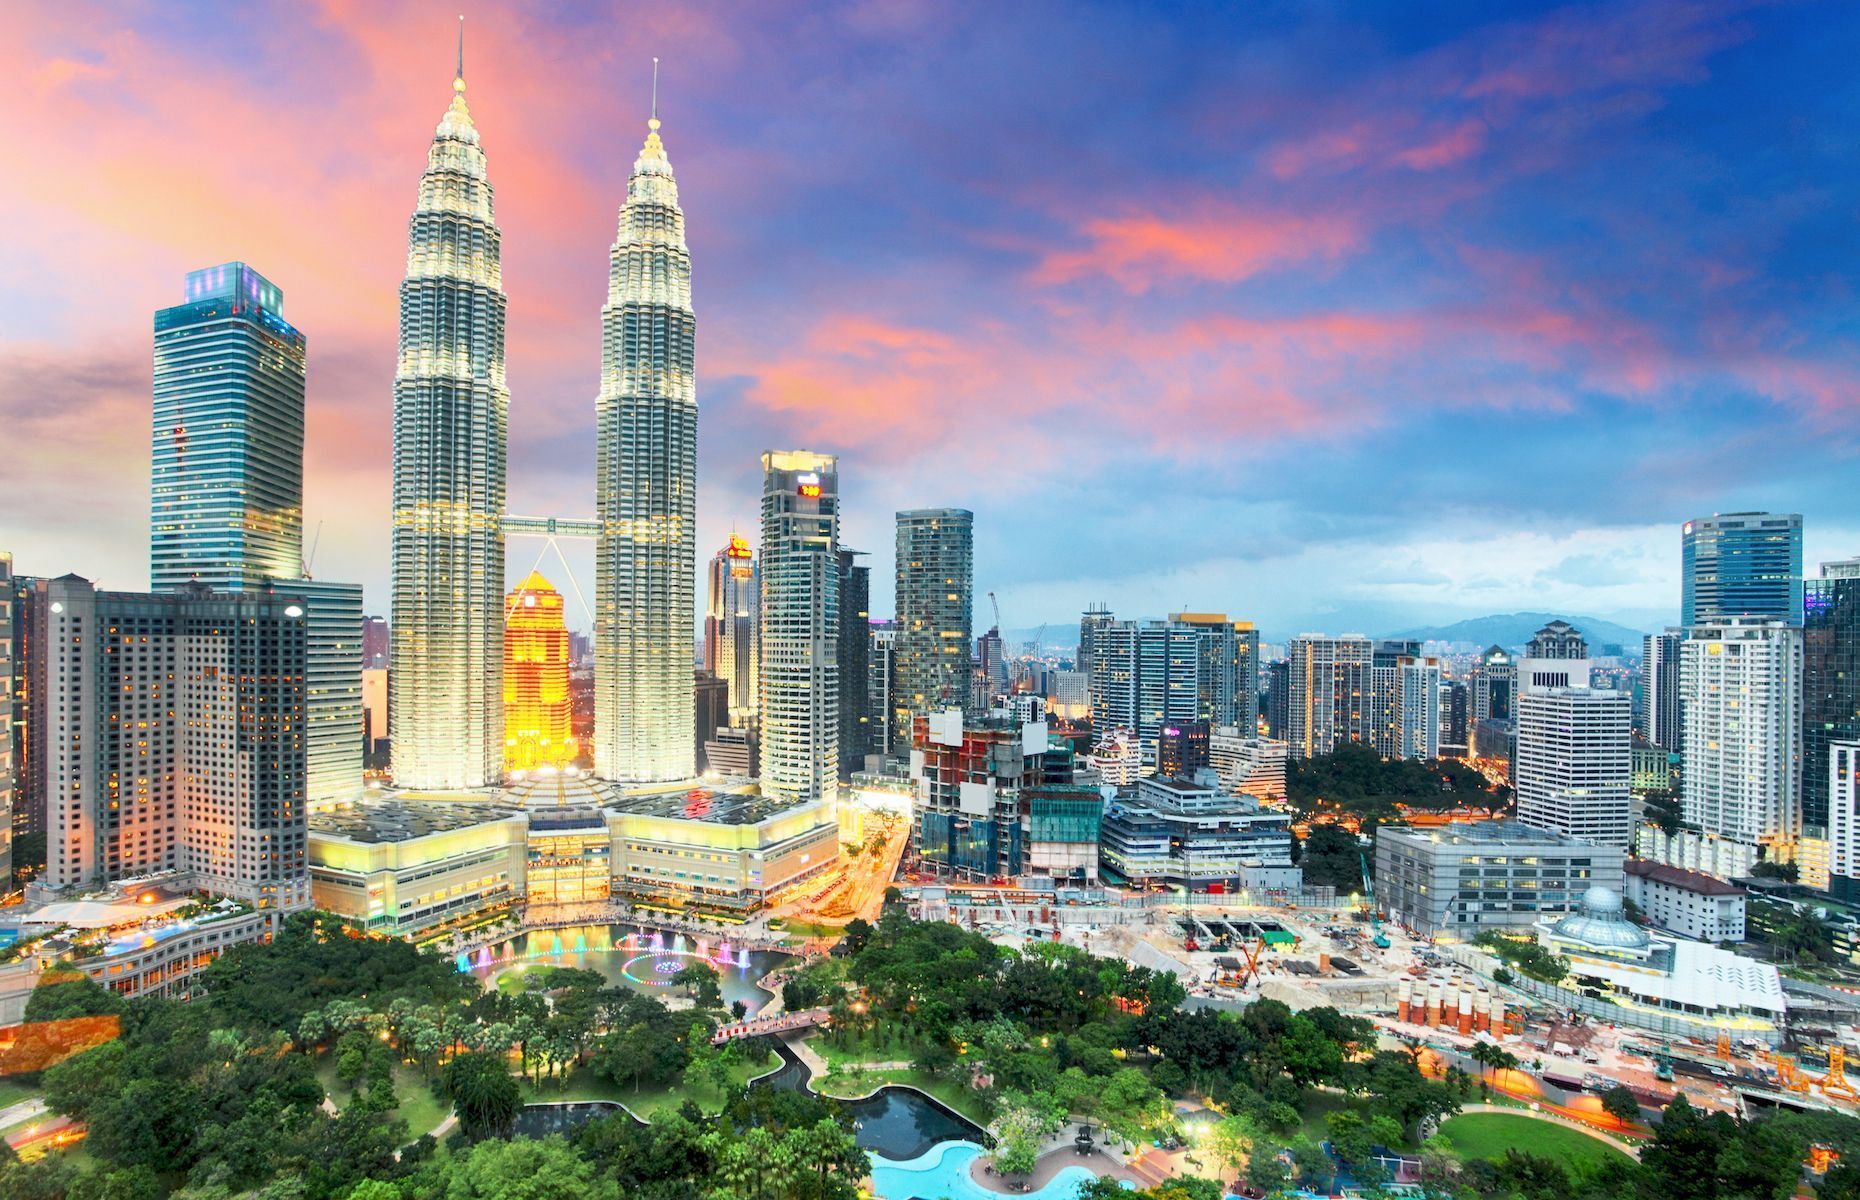 Capital of Malaysia, <a href="https://ca.hotels.com/go/malaysia/best-things-to-do-kuala-lumpur" rel="noreferrer noopener">Kuala Lumpur</a> is a vibrant, cosmopolitan metropolis that combines tradition and modernity. Among its finest attractions are the famous Petronas Twin Towers, offering exceptional panoramic views from an observation deck. Also be sure to visit Merdeka Square’s majestic colonial buildings, Sultan Abdul Samad’s palace, and the city’s night markets while in Kuala Lumpur.